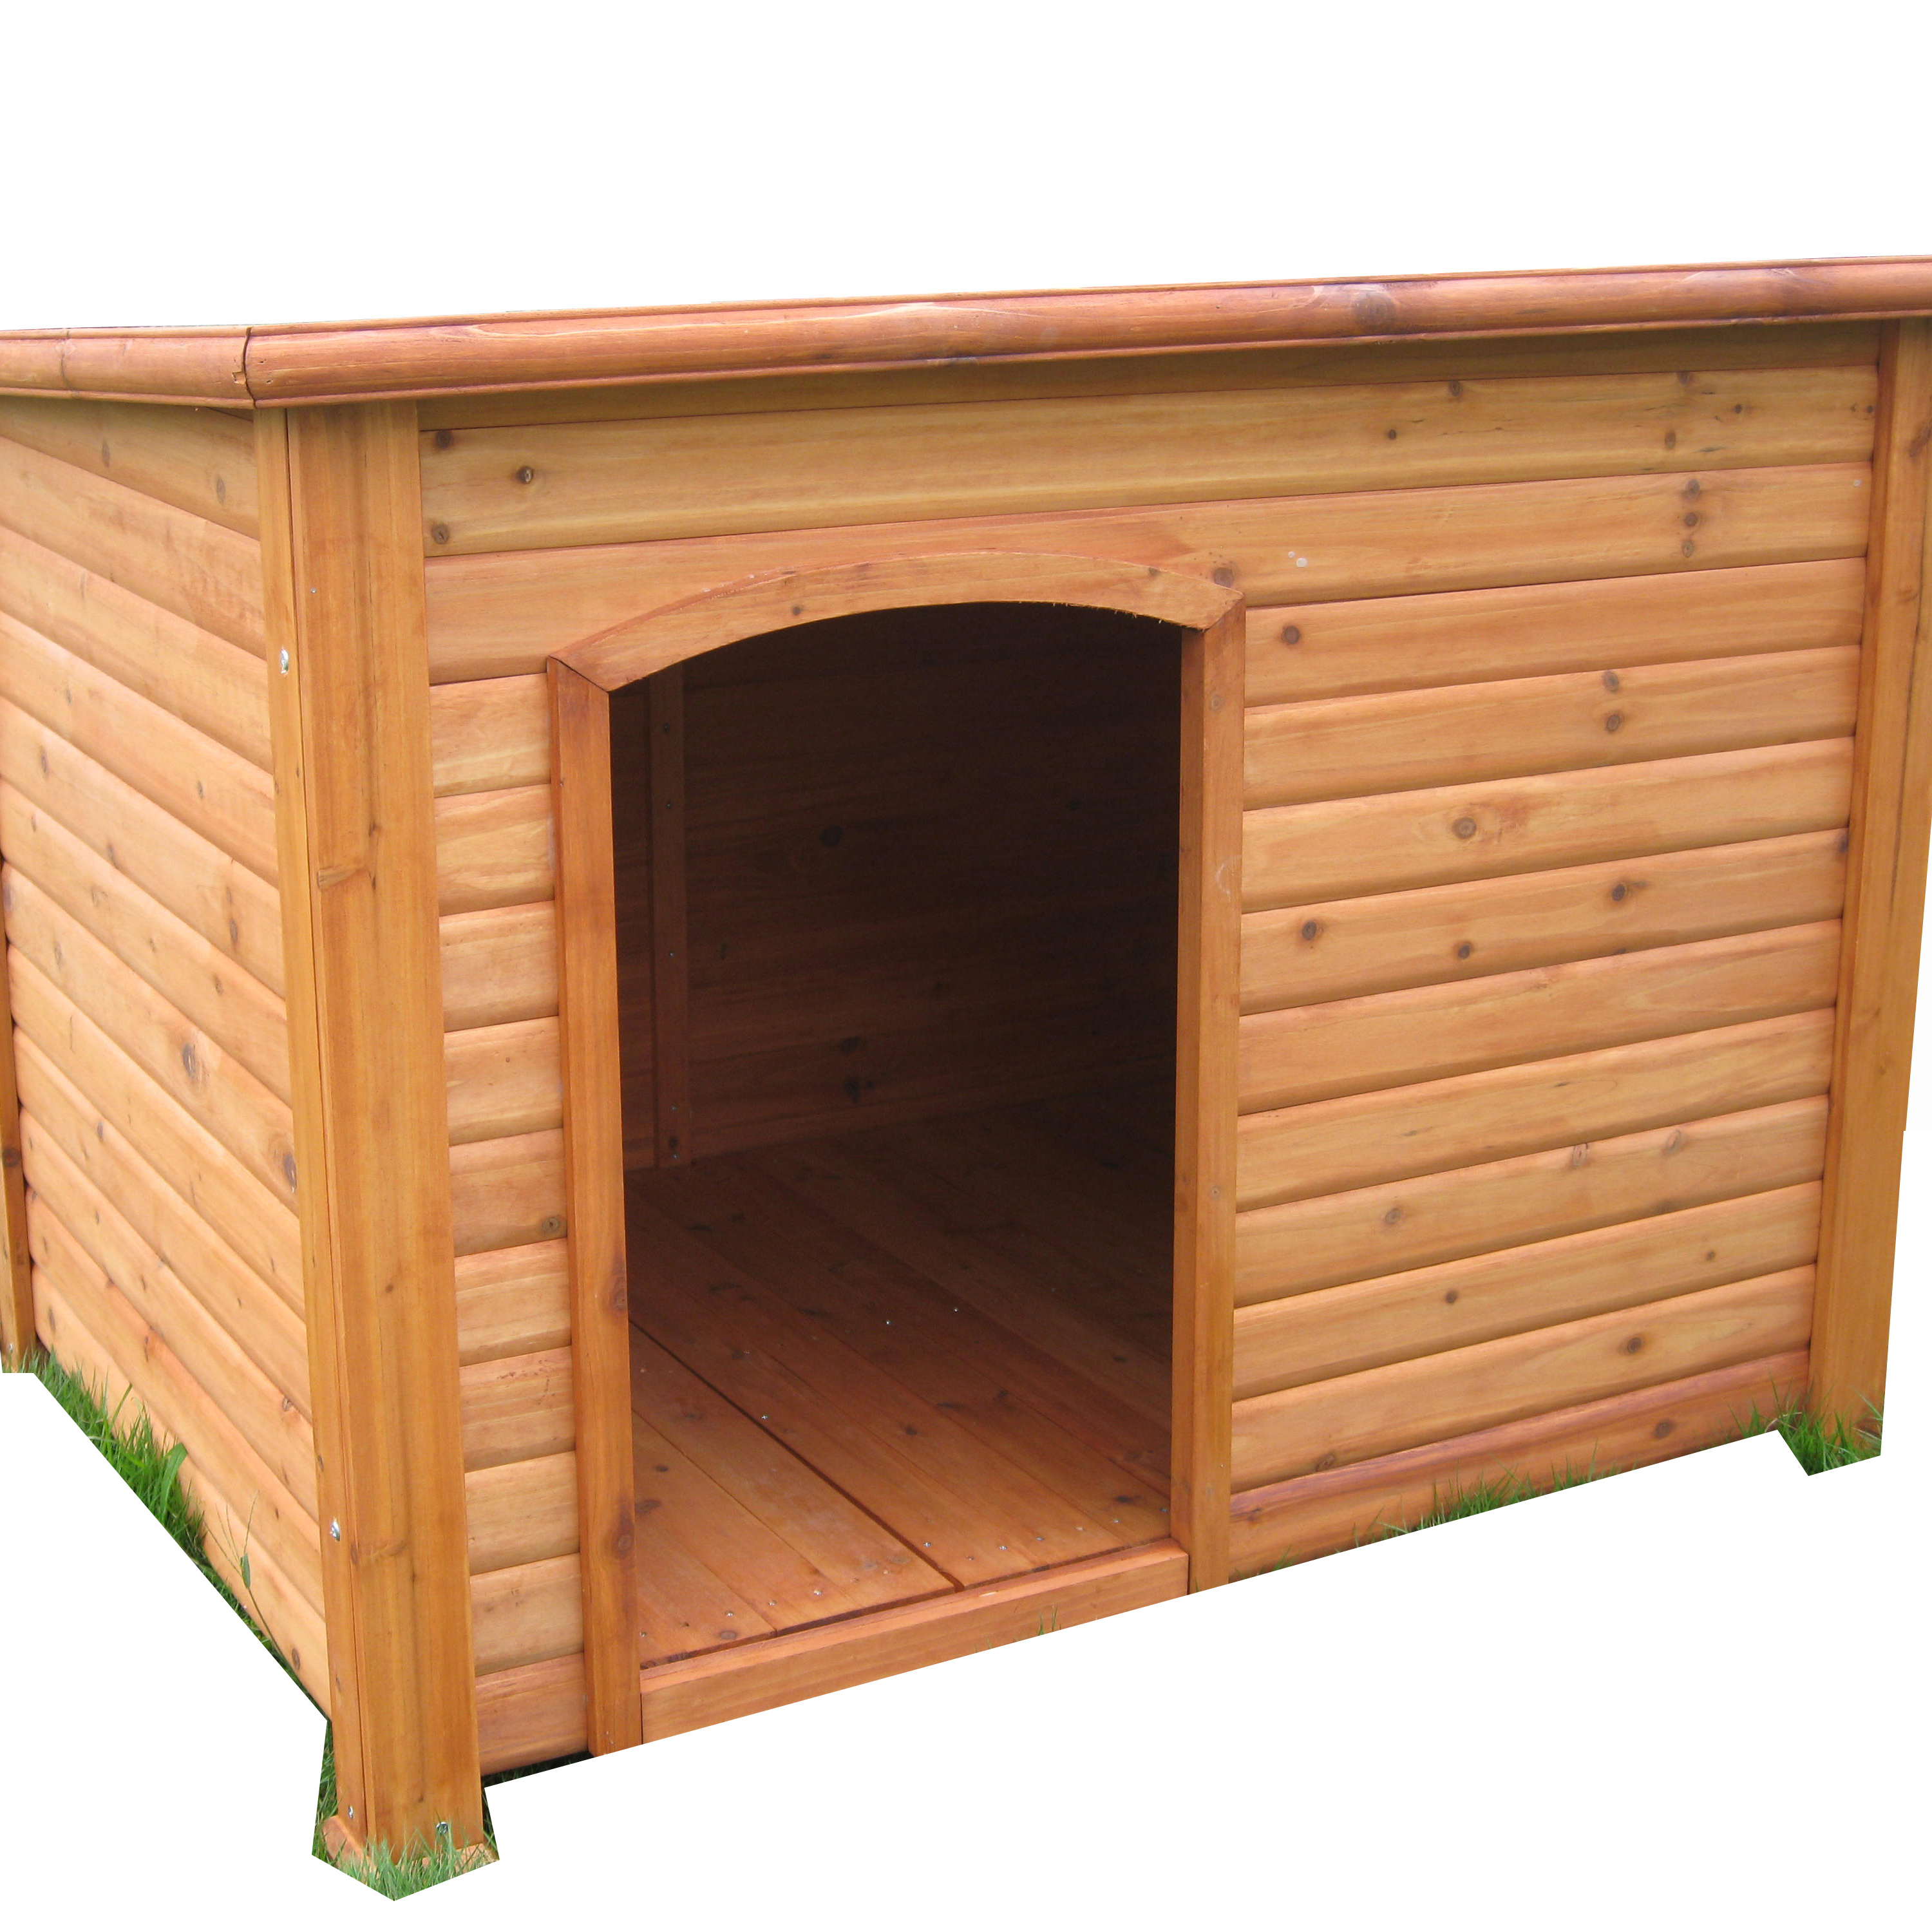 Sale Fire-proof Outdoor Waterproof wooden Dog House pet cages